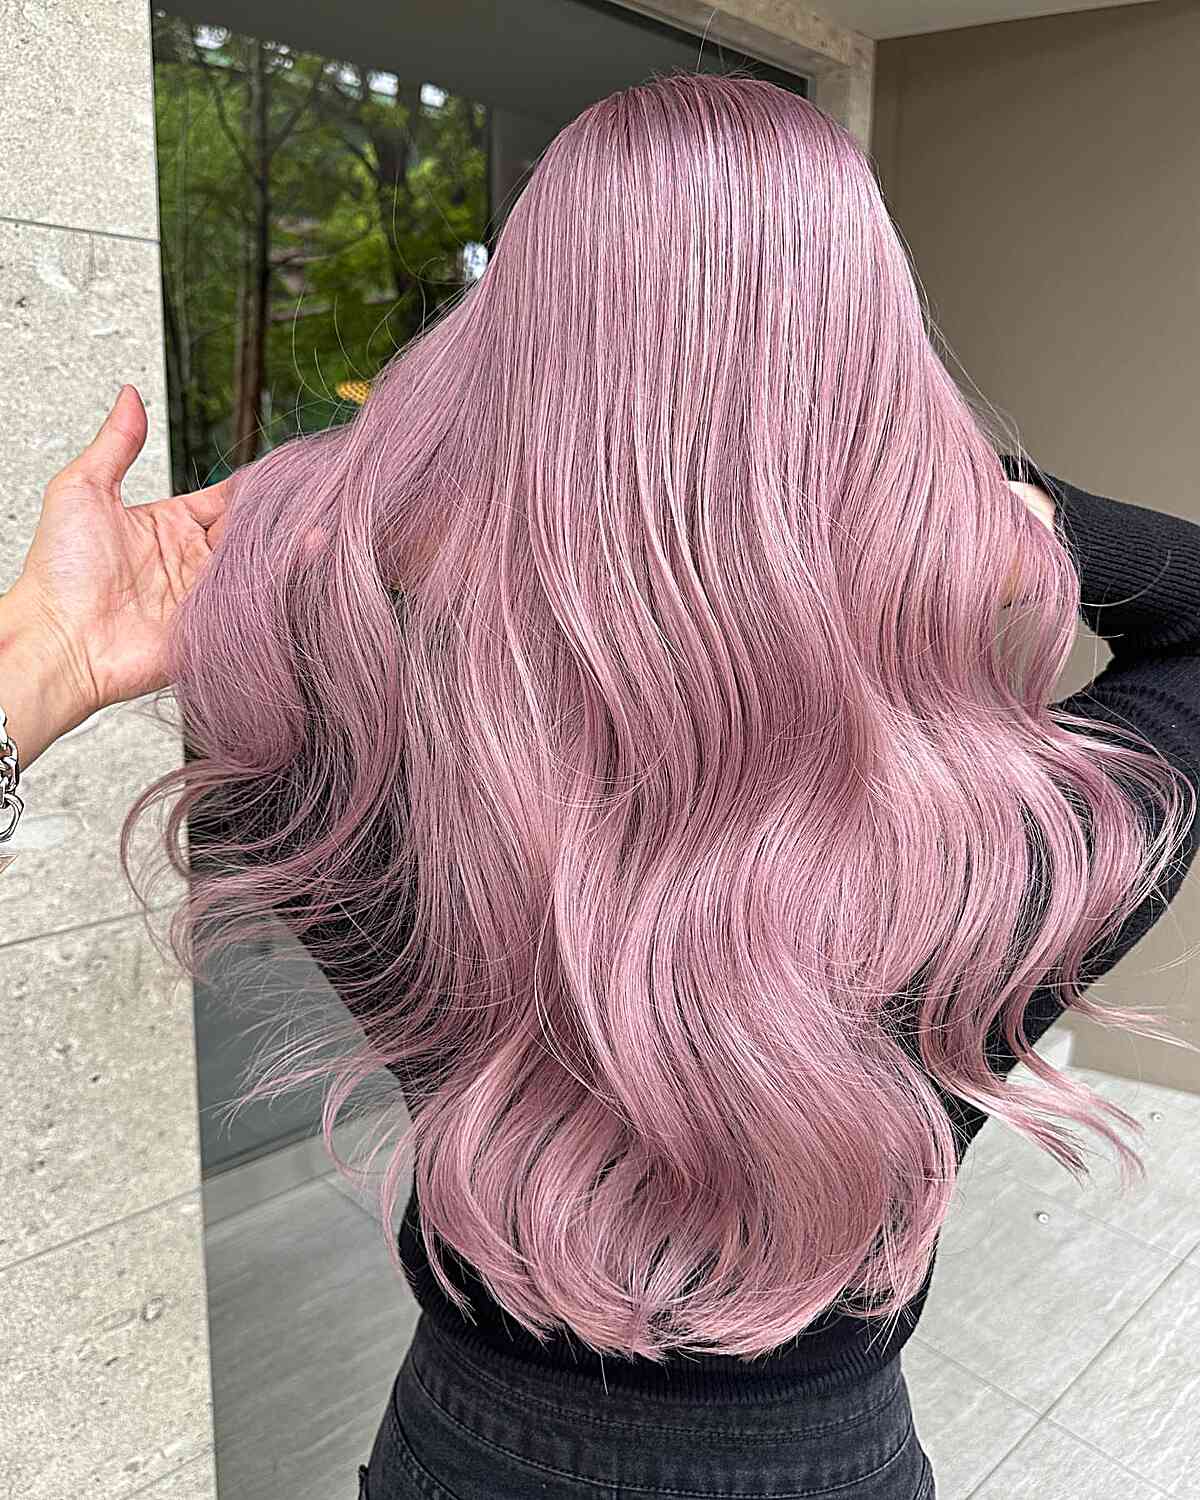 Long Dusty Pastel Pink Hair color for ladies with straight hair